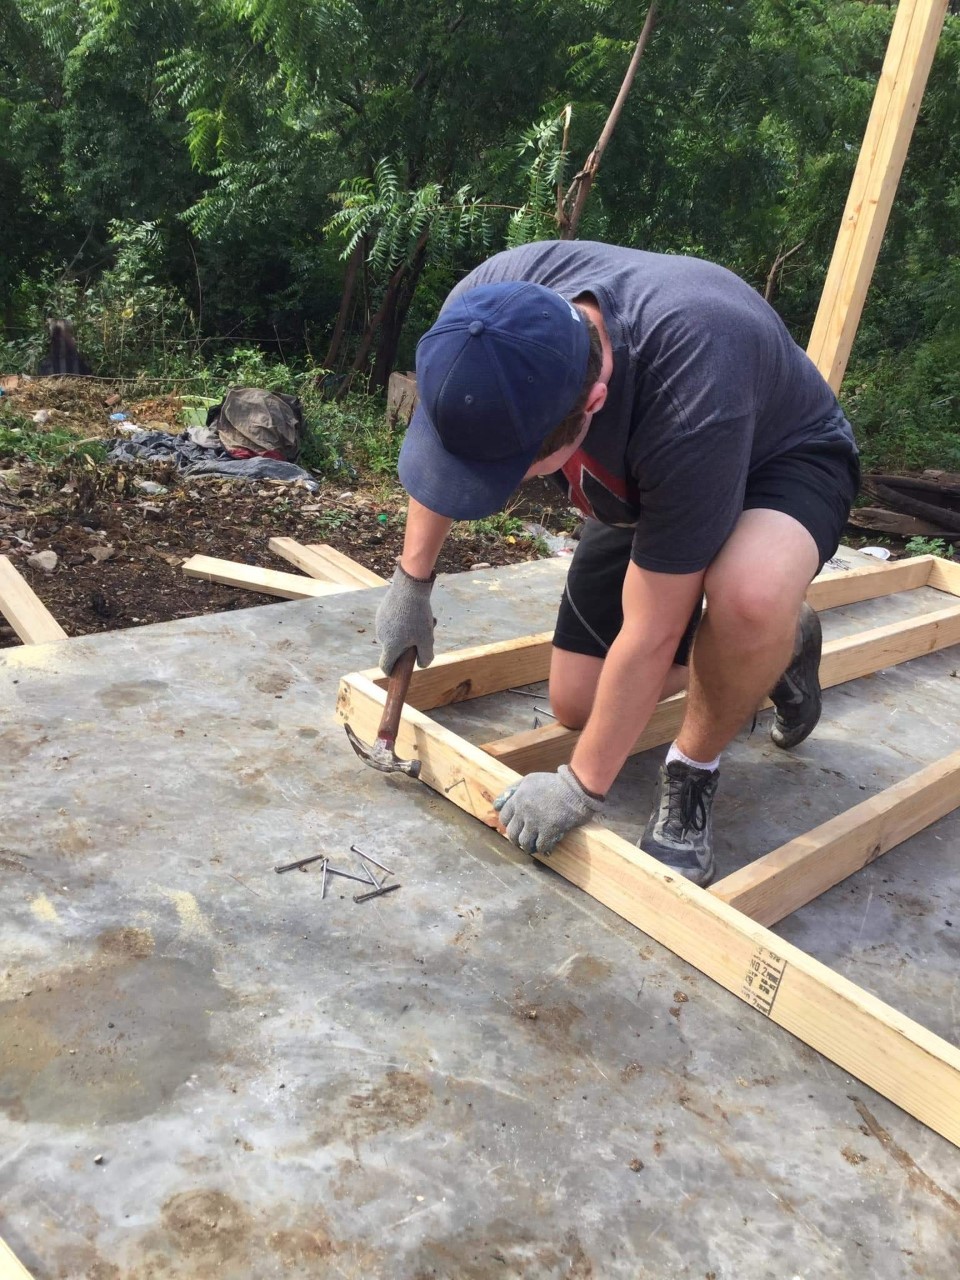 Patrick helped build homes in Haiti during two separate trips to the country